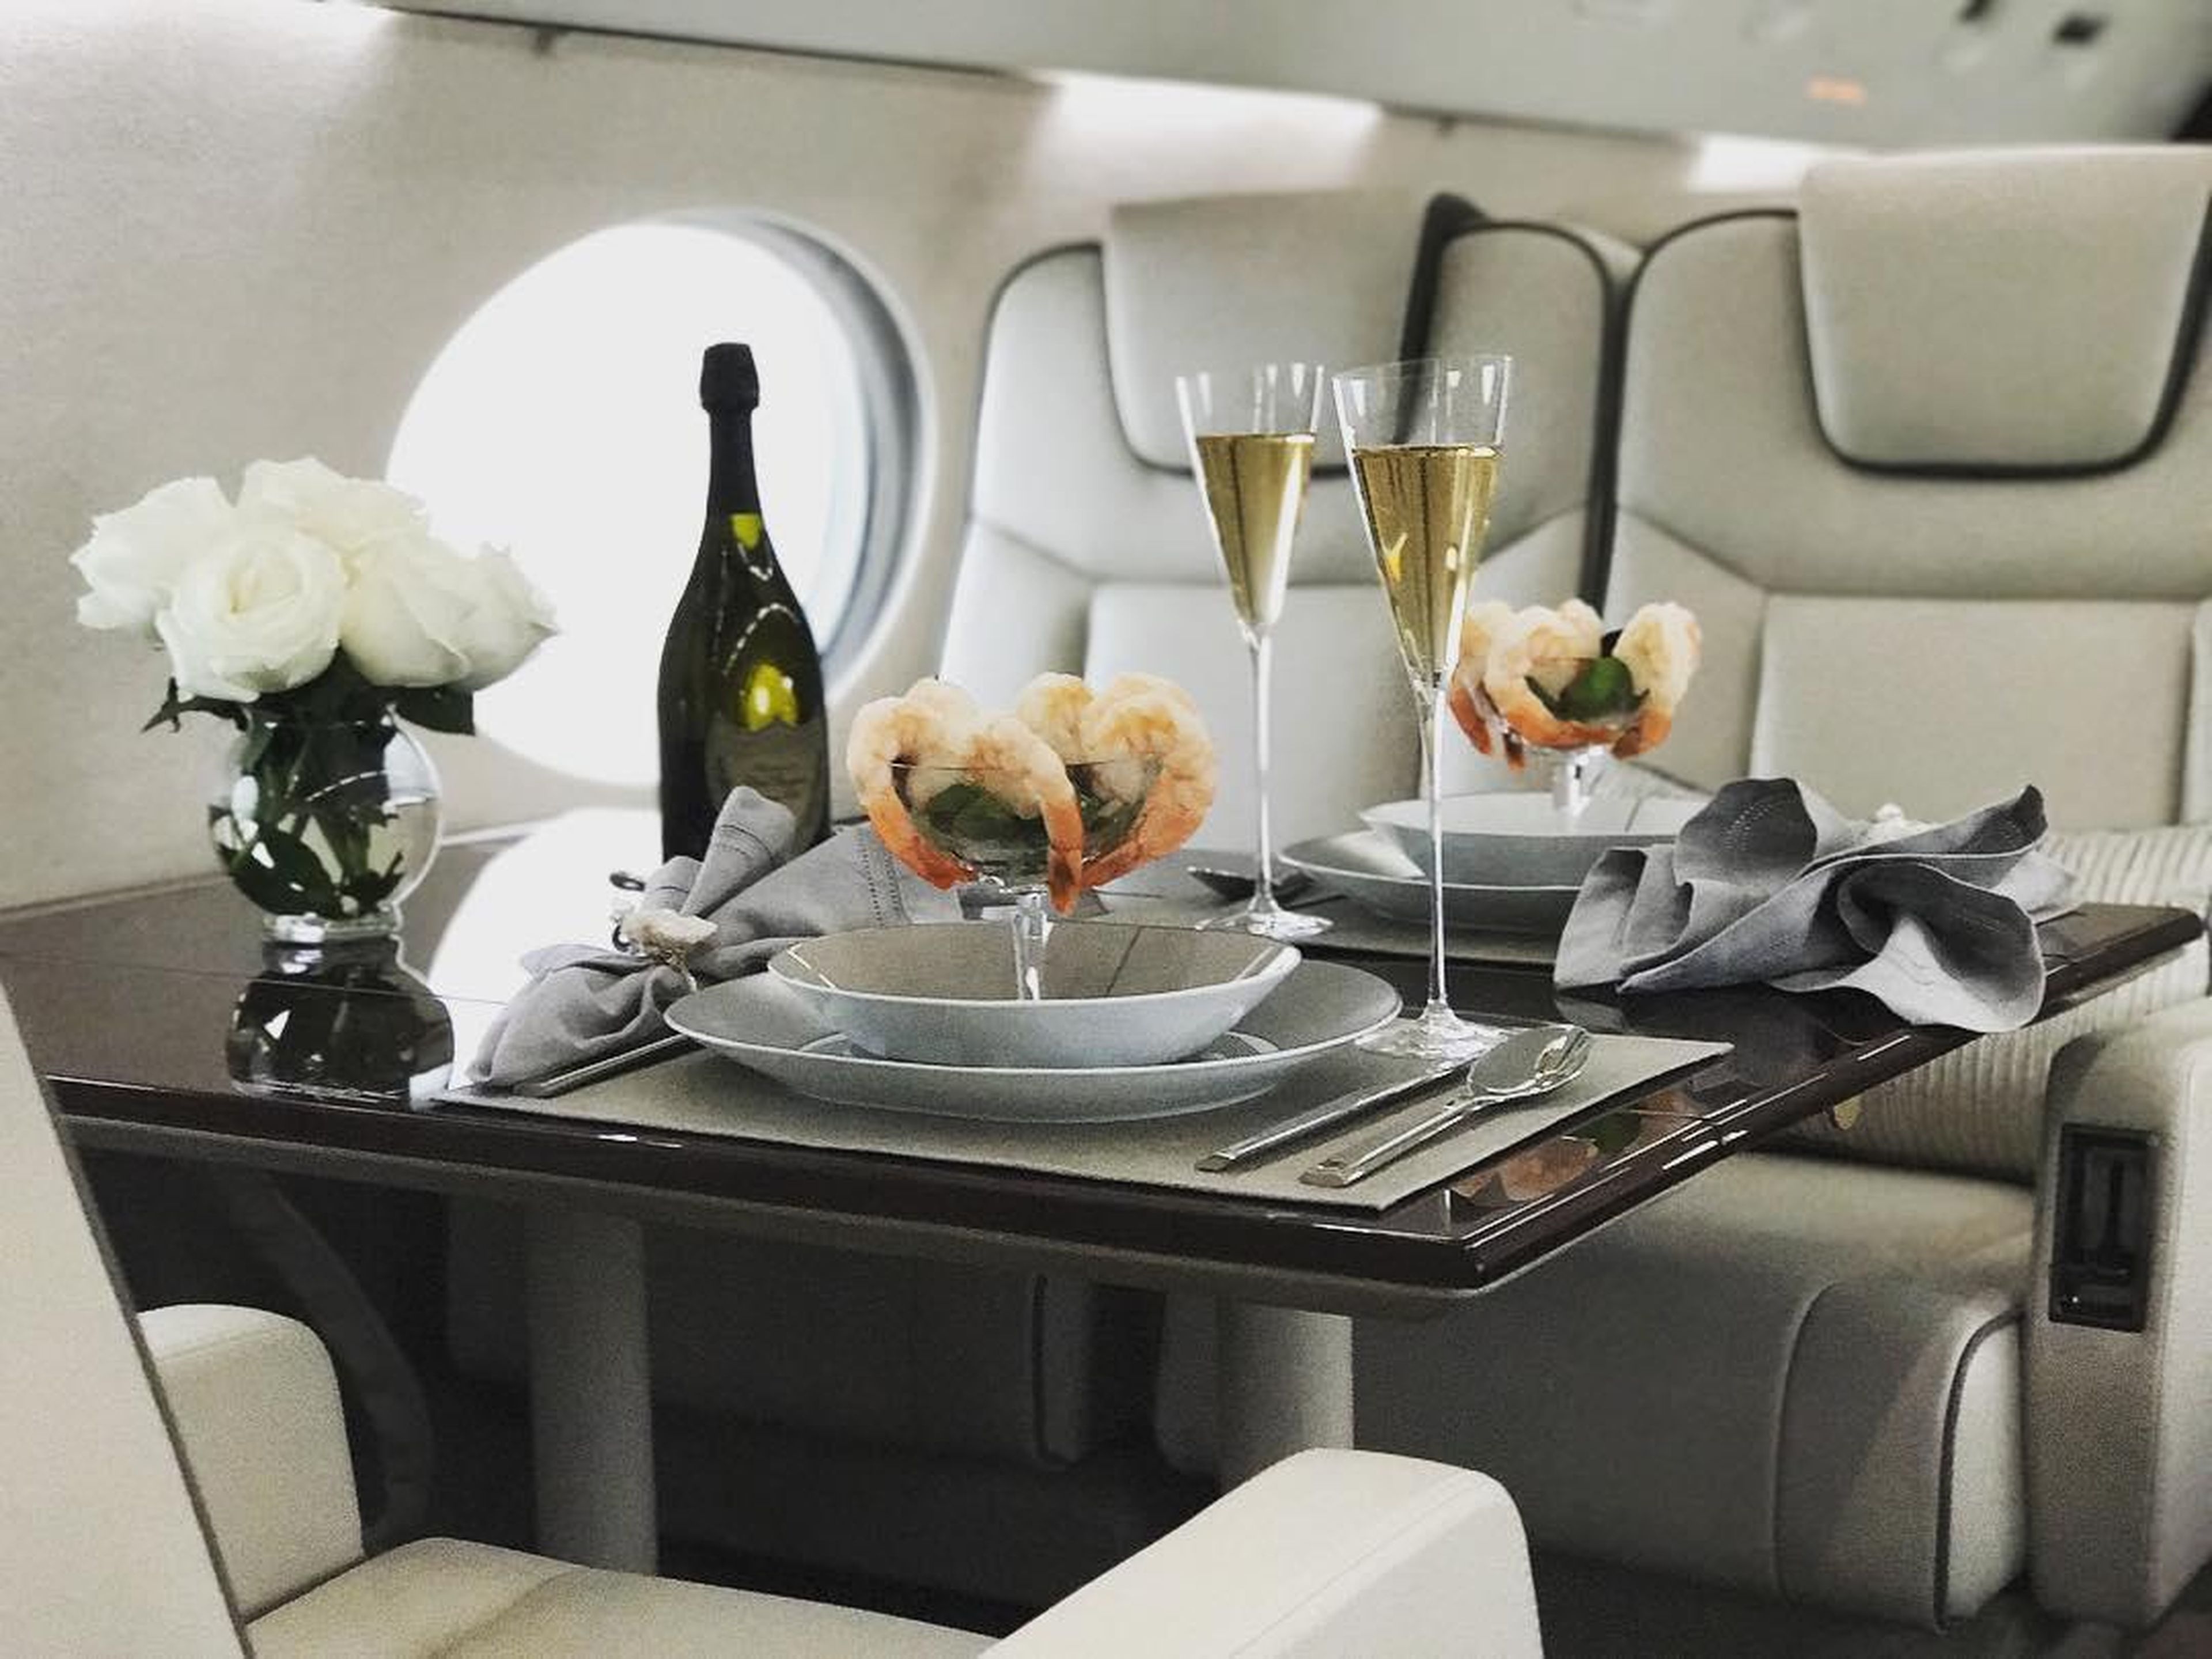 When flying private, the meals can look a bit different than your typical airline food.